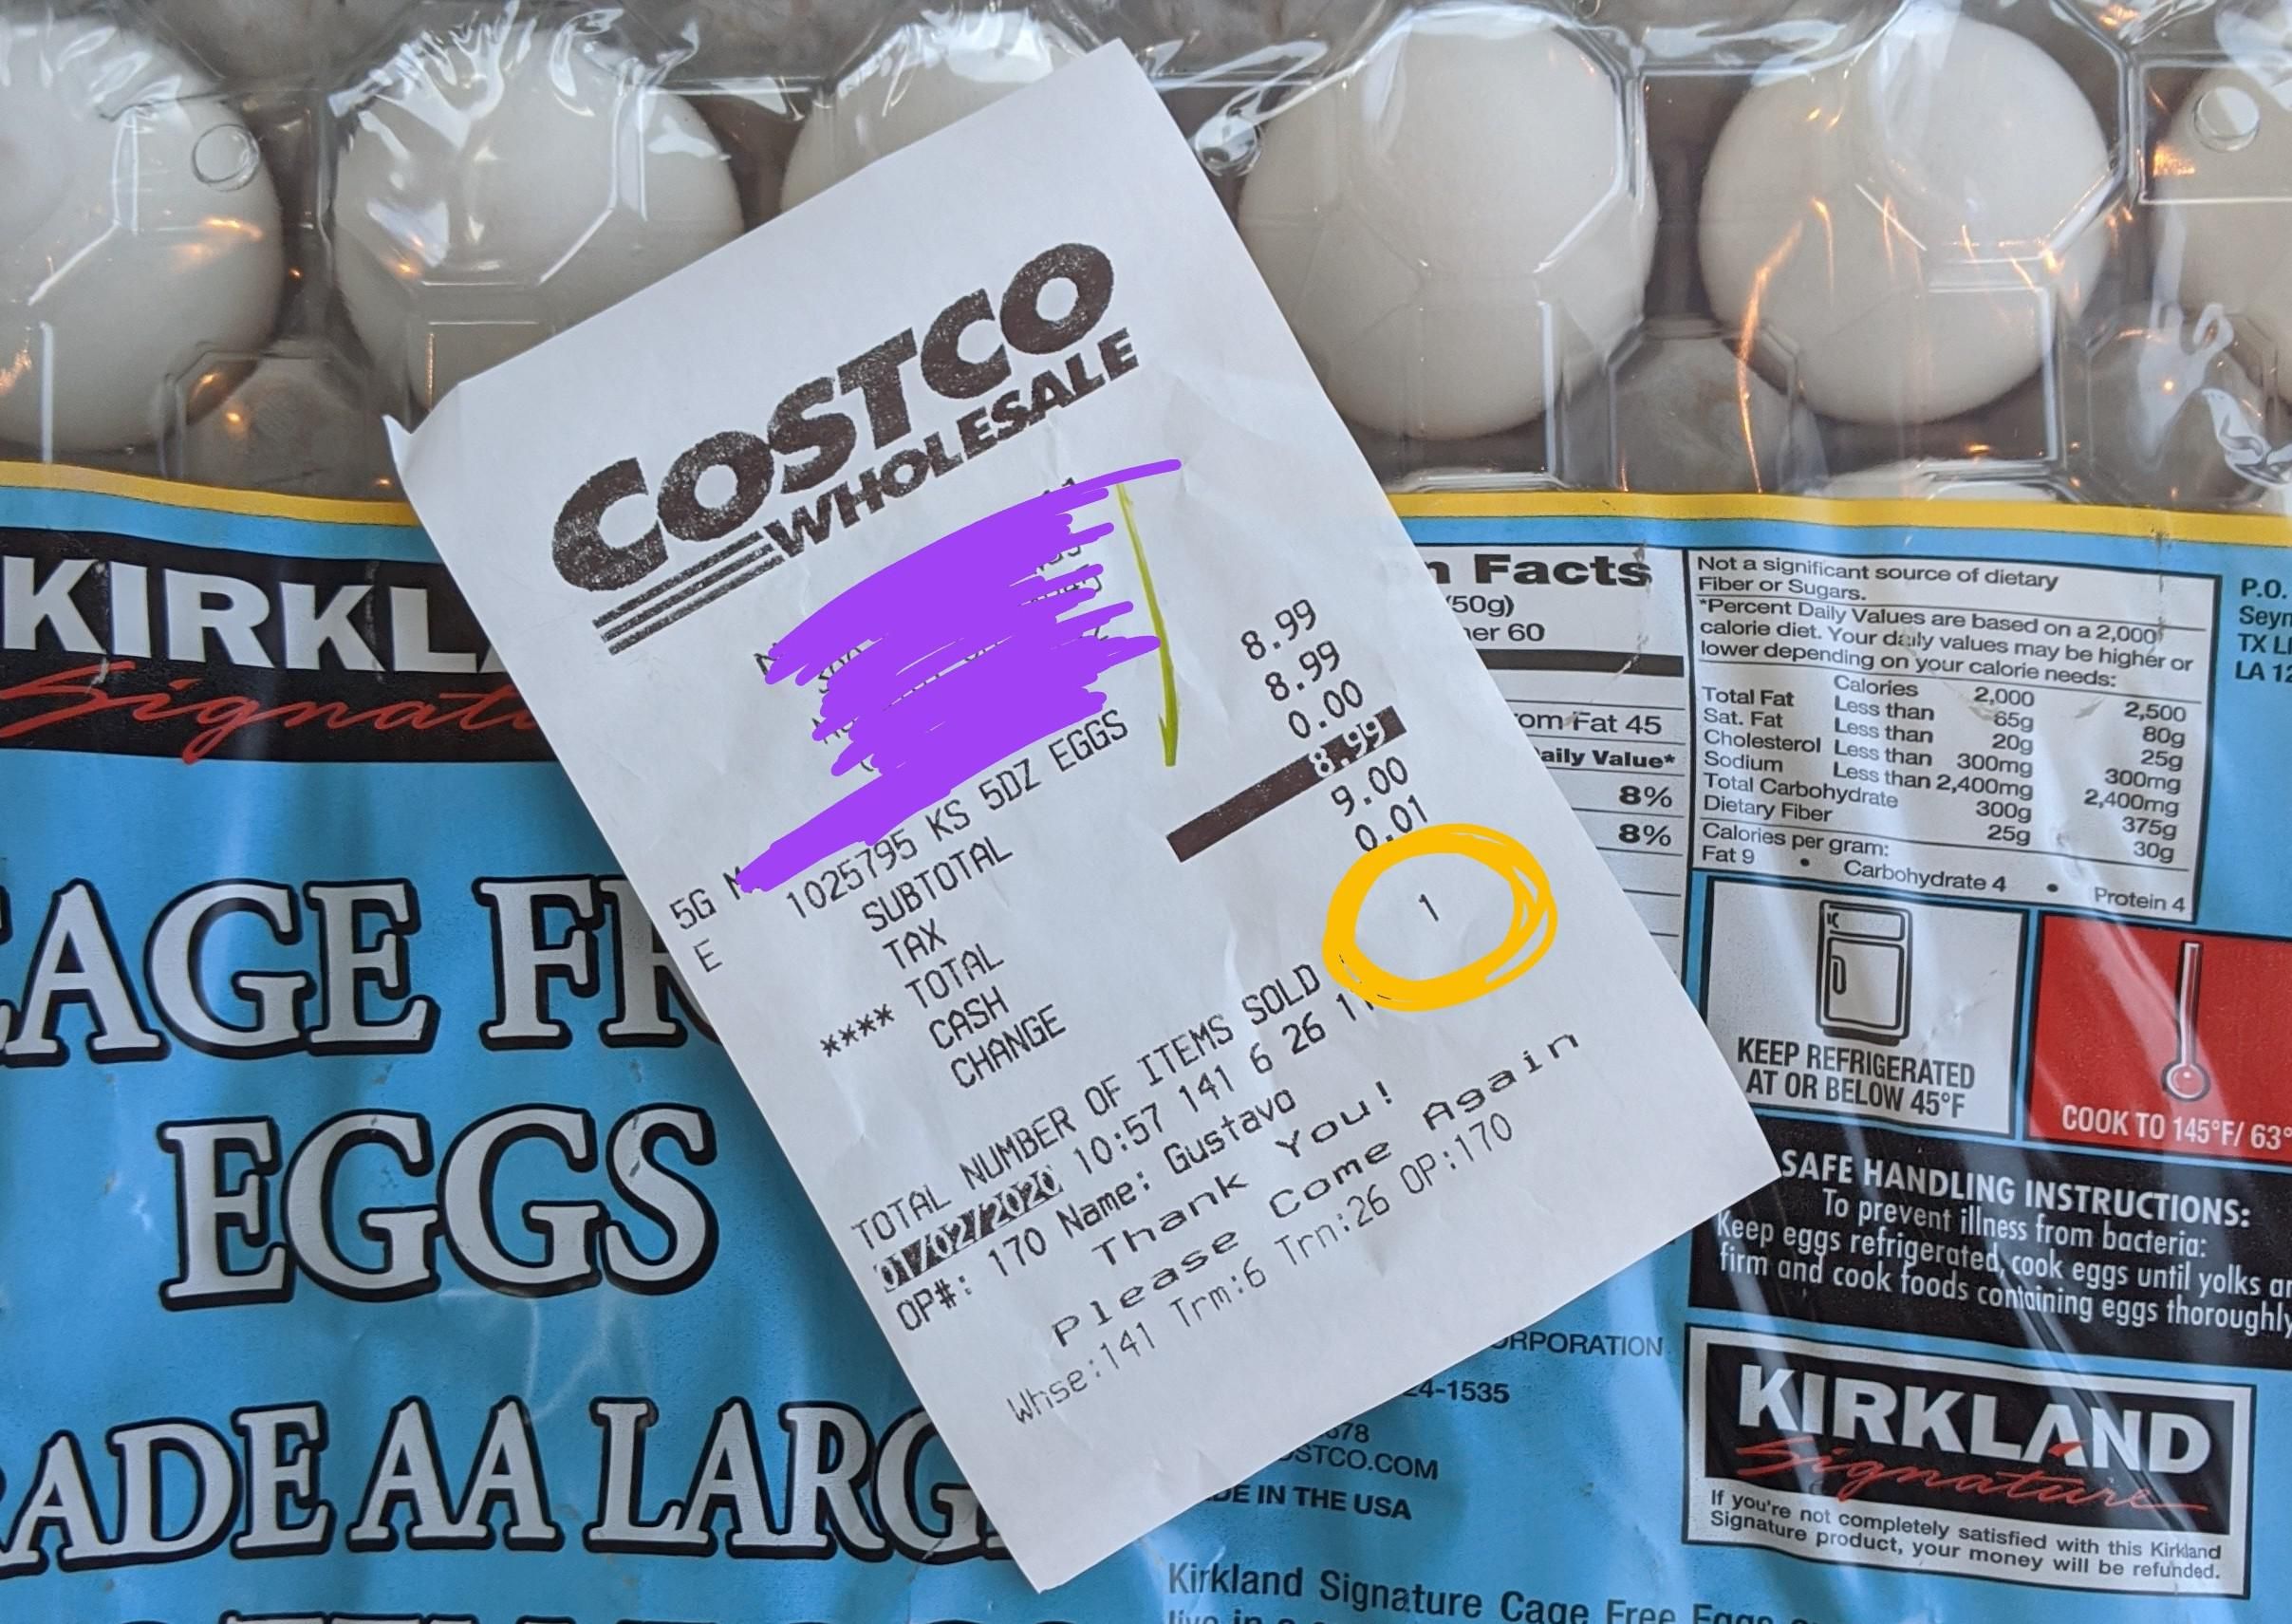 i just went to costco for one thing and succeeded, AMA